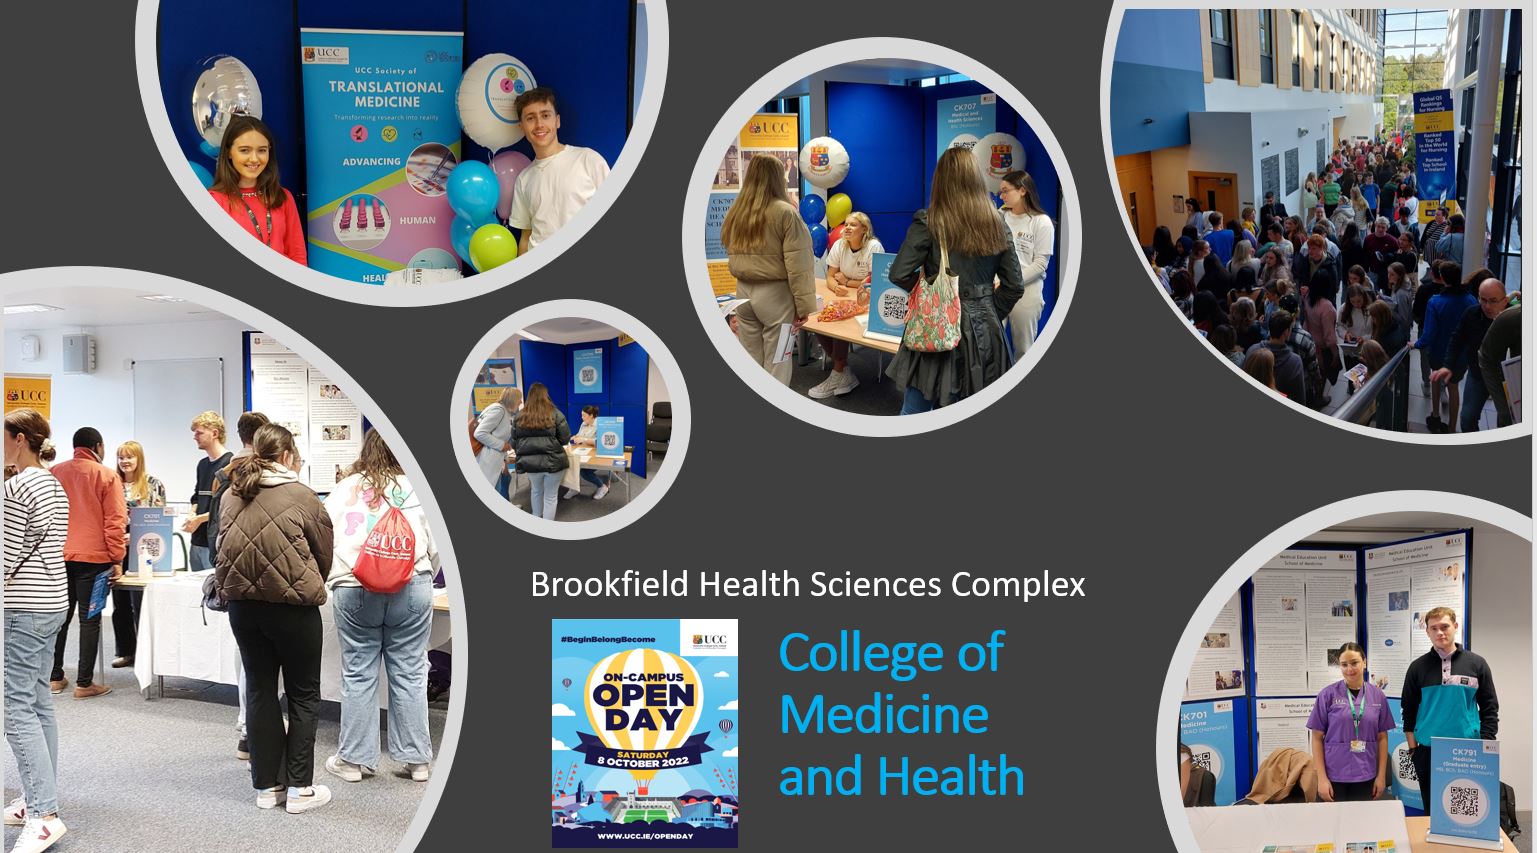 College of Medicine and Health Open Day 2022